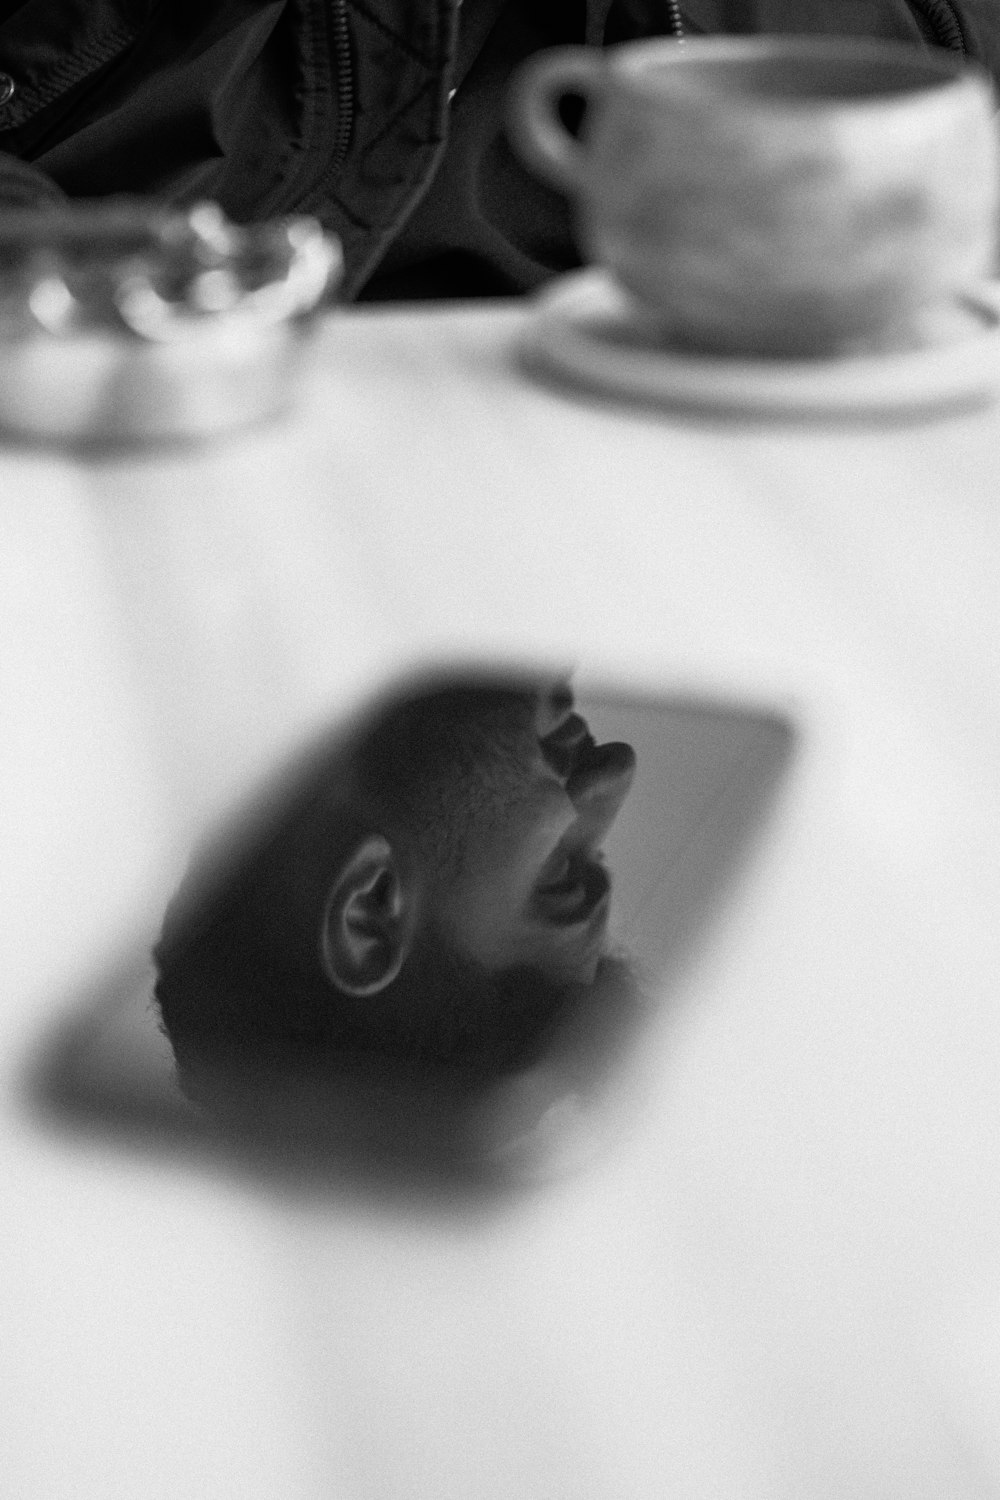 a black and white photo of a man's face on a table